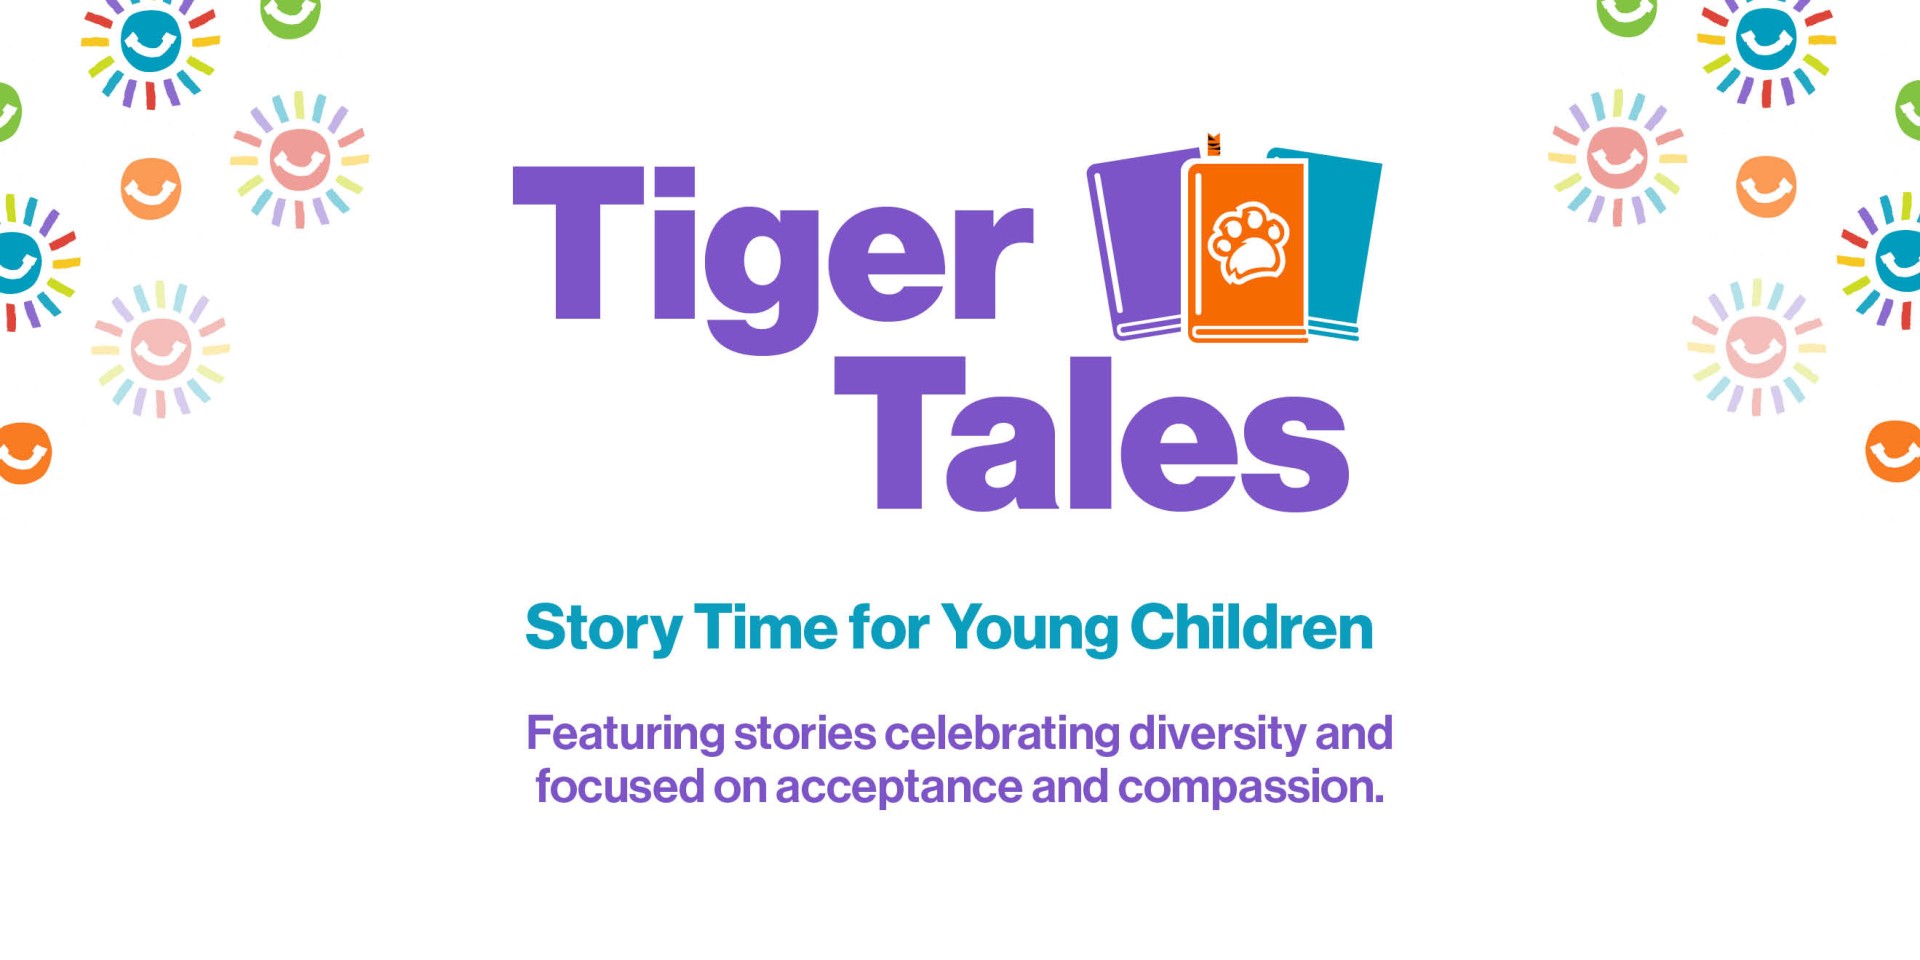 Tiger Tales: Story Time for Young Children. Featuring stories celebrating diversity and focused on acceptance and compassion.